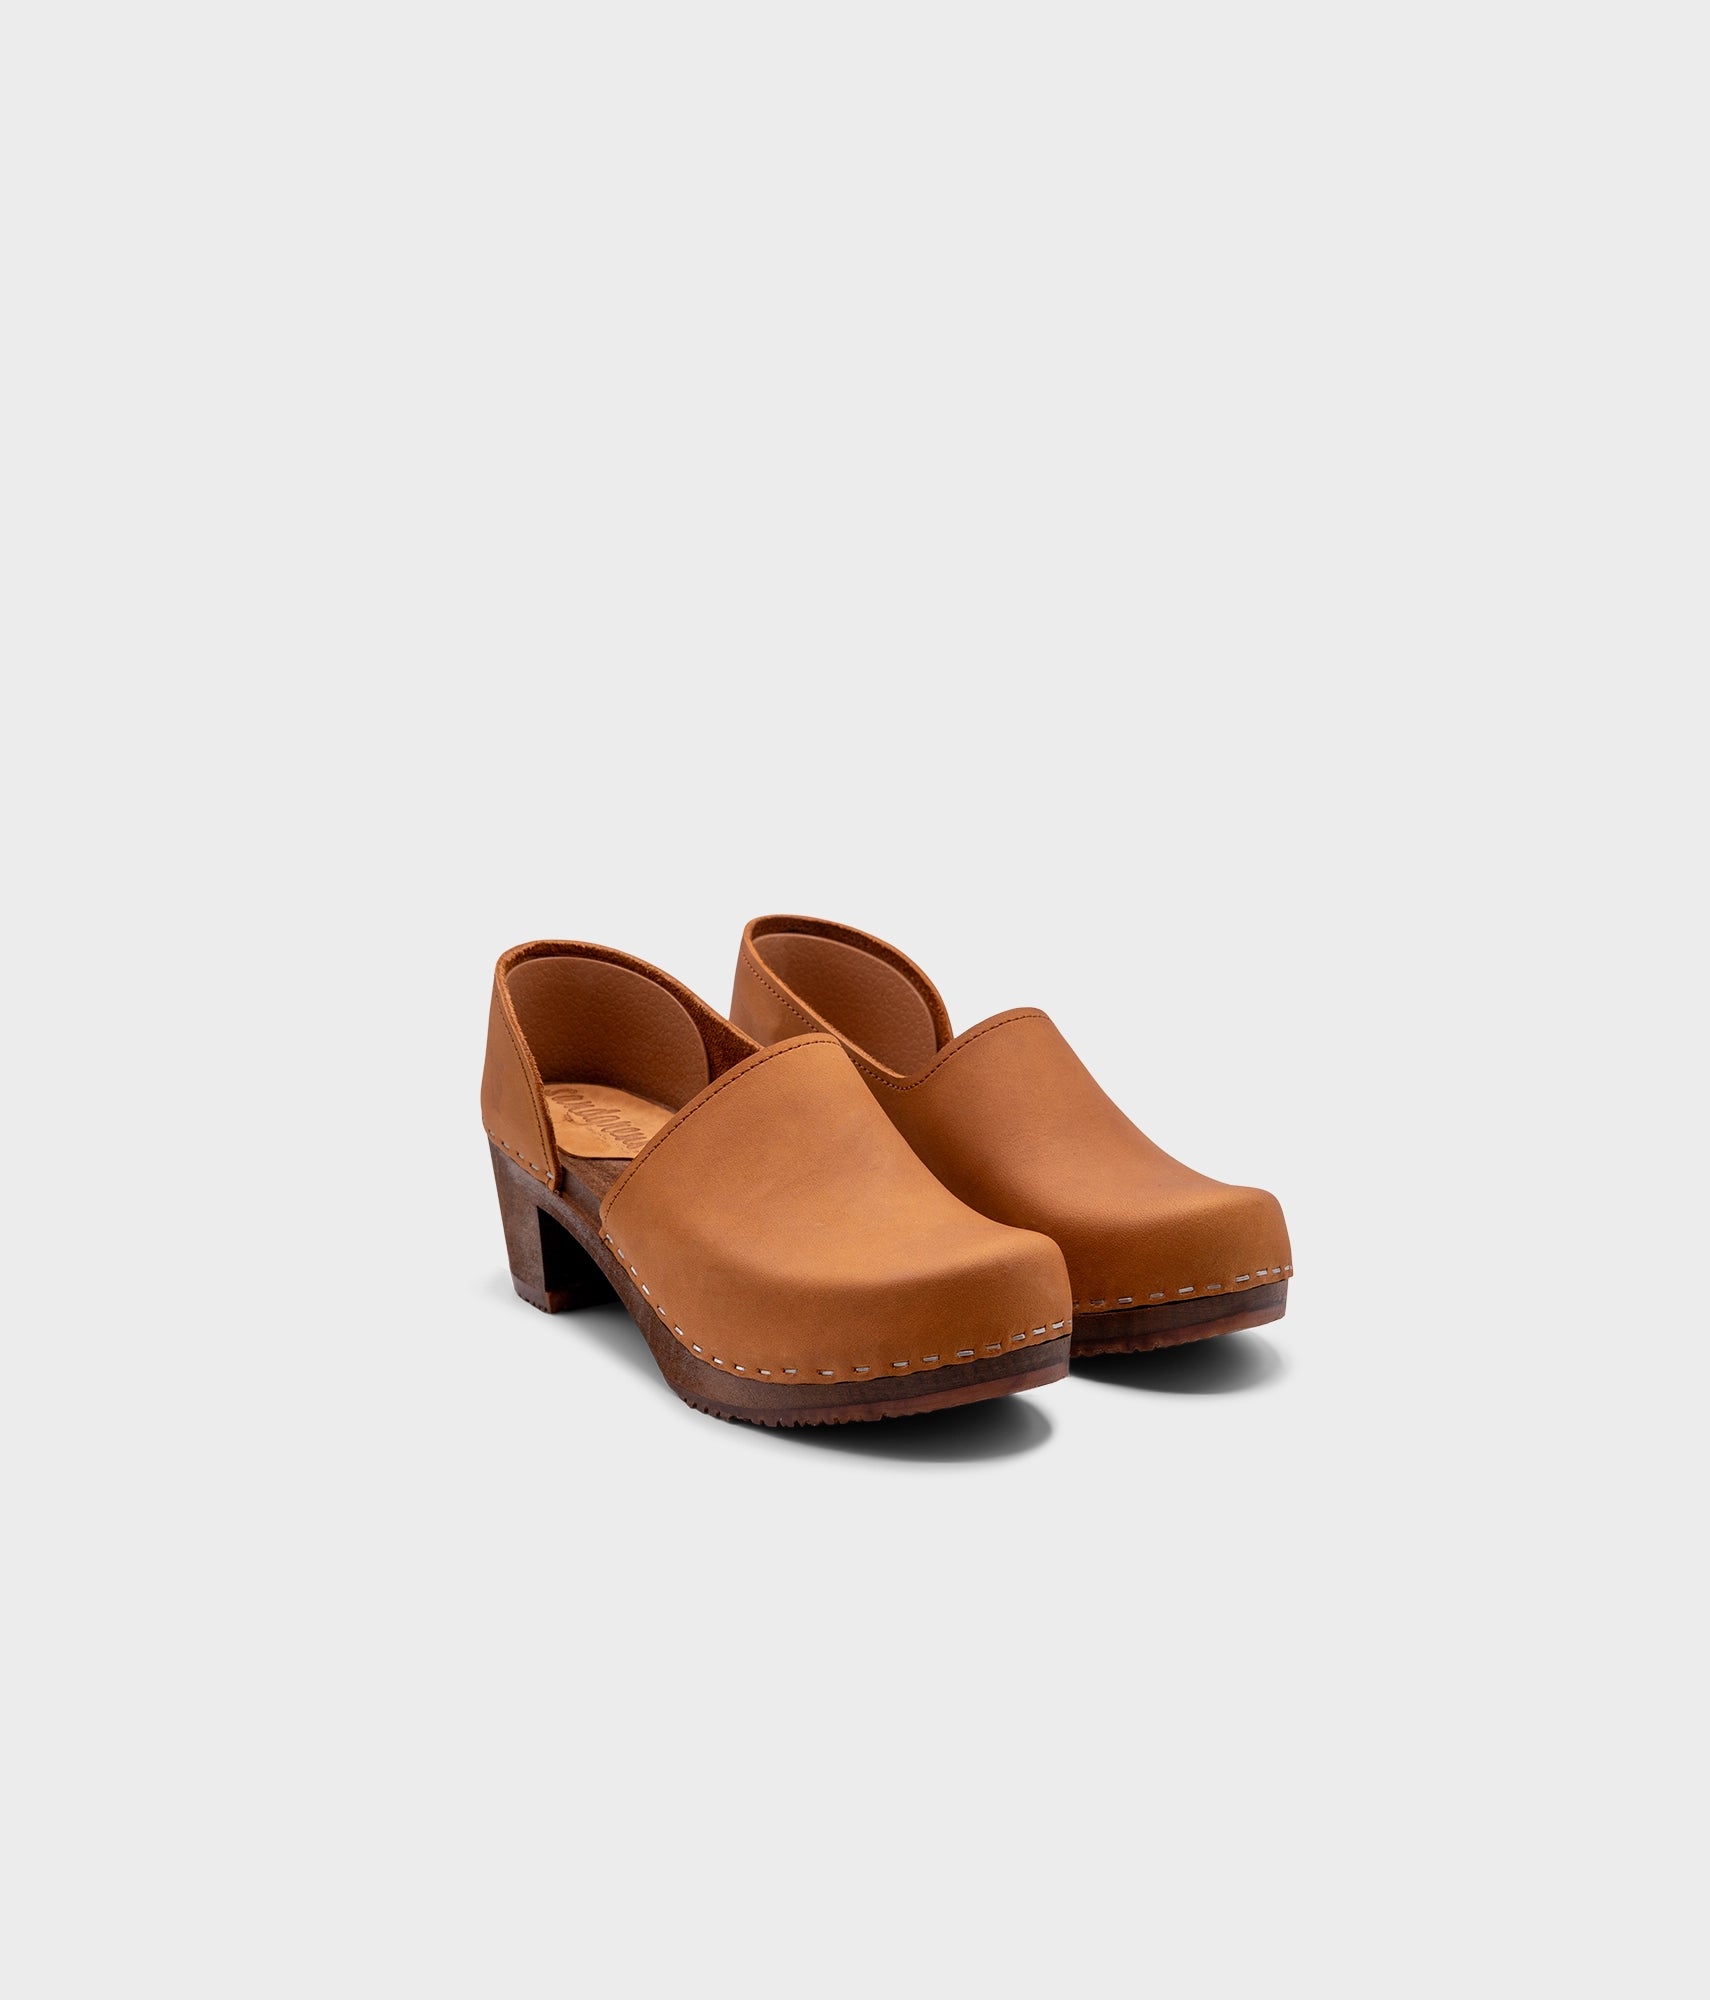 high heeled closed-back clogs in light brown nubuck leather stapled on a dark wooden base